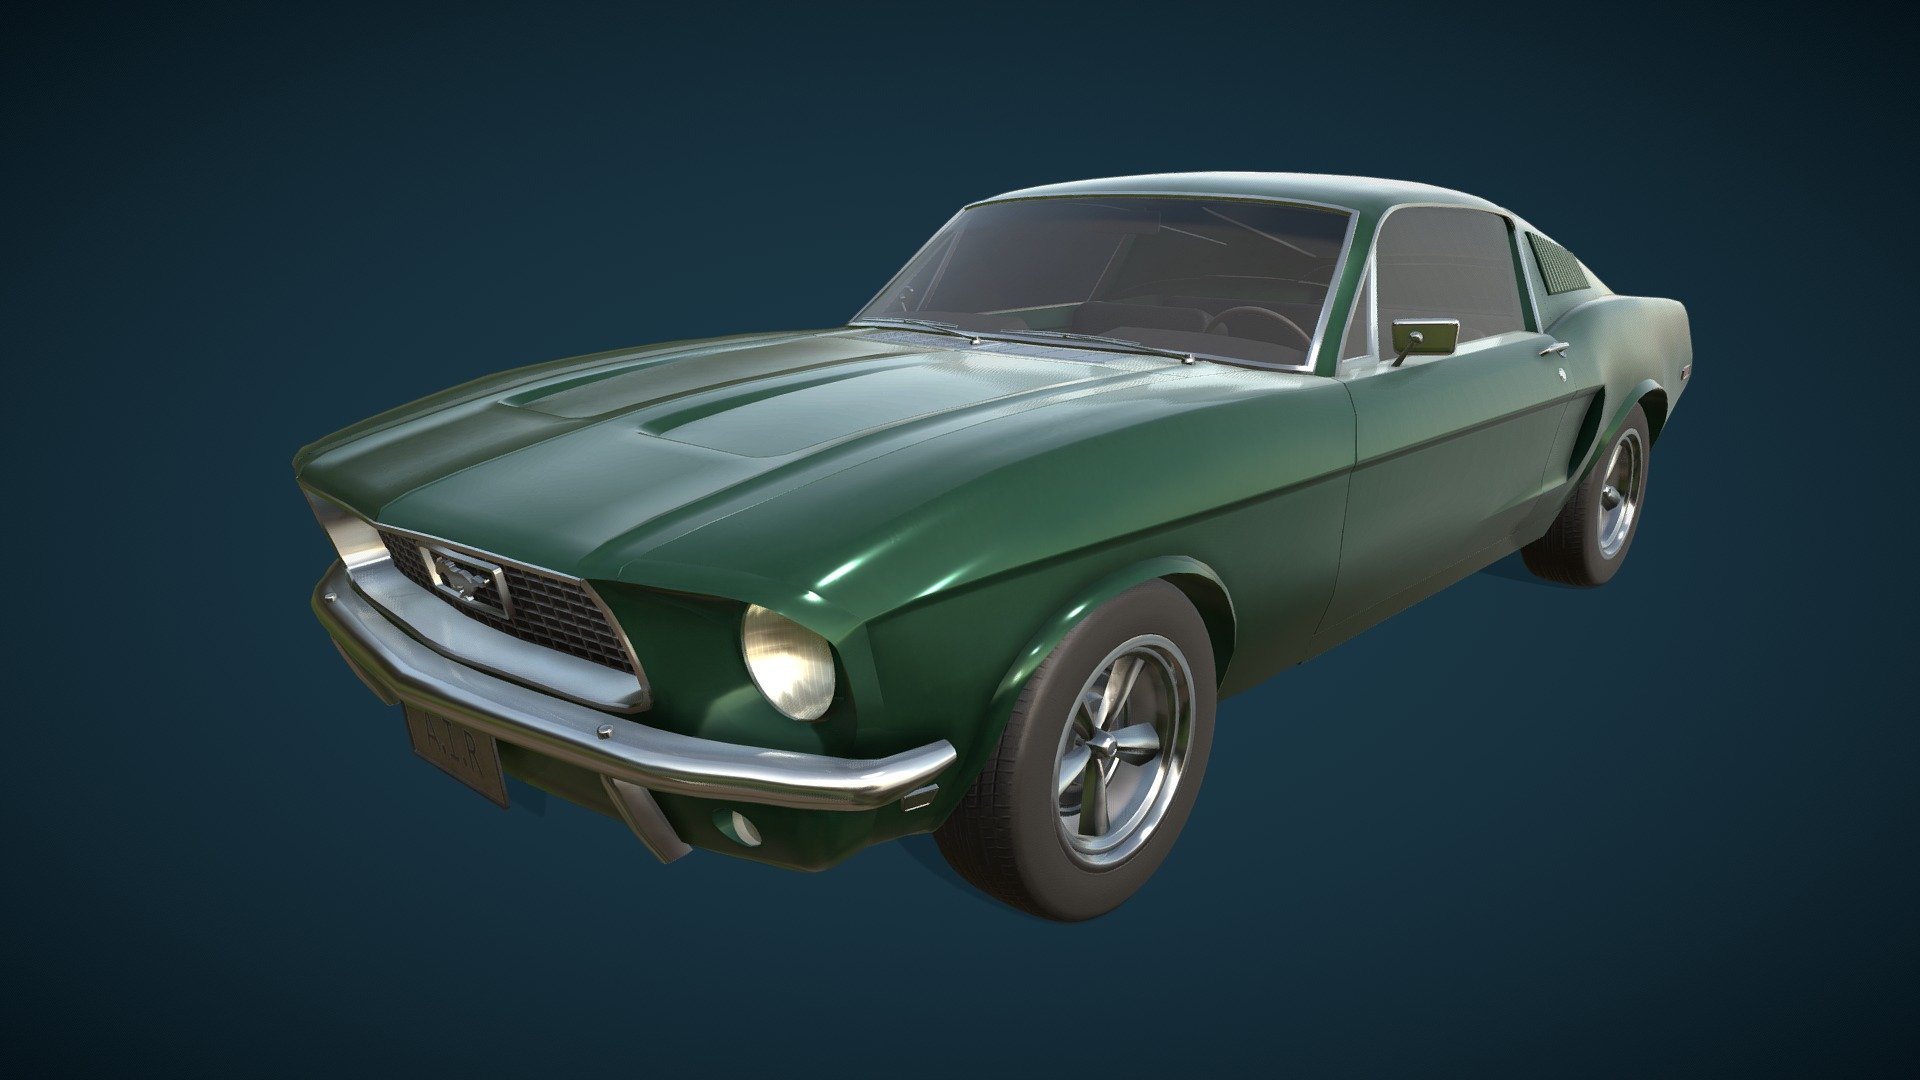 3D model of the legendary mustang. This model took me 2 weeks.




77k polygons, 8 UV maps. PBR 4K / 2K Textures.

The car model is made in low poly and optimized / Game ready

Textures: BaseColor / Roughness / Metallic / Normal map.

Textured in Substance 3D Painter

Modeled in Blender 3D
 - Ford Mustang 1968 - low poly - Buy Royalty Free 3D model by A.I.R (@air3dart) 3d model